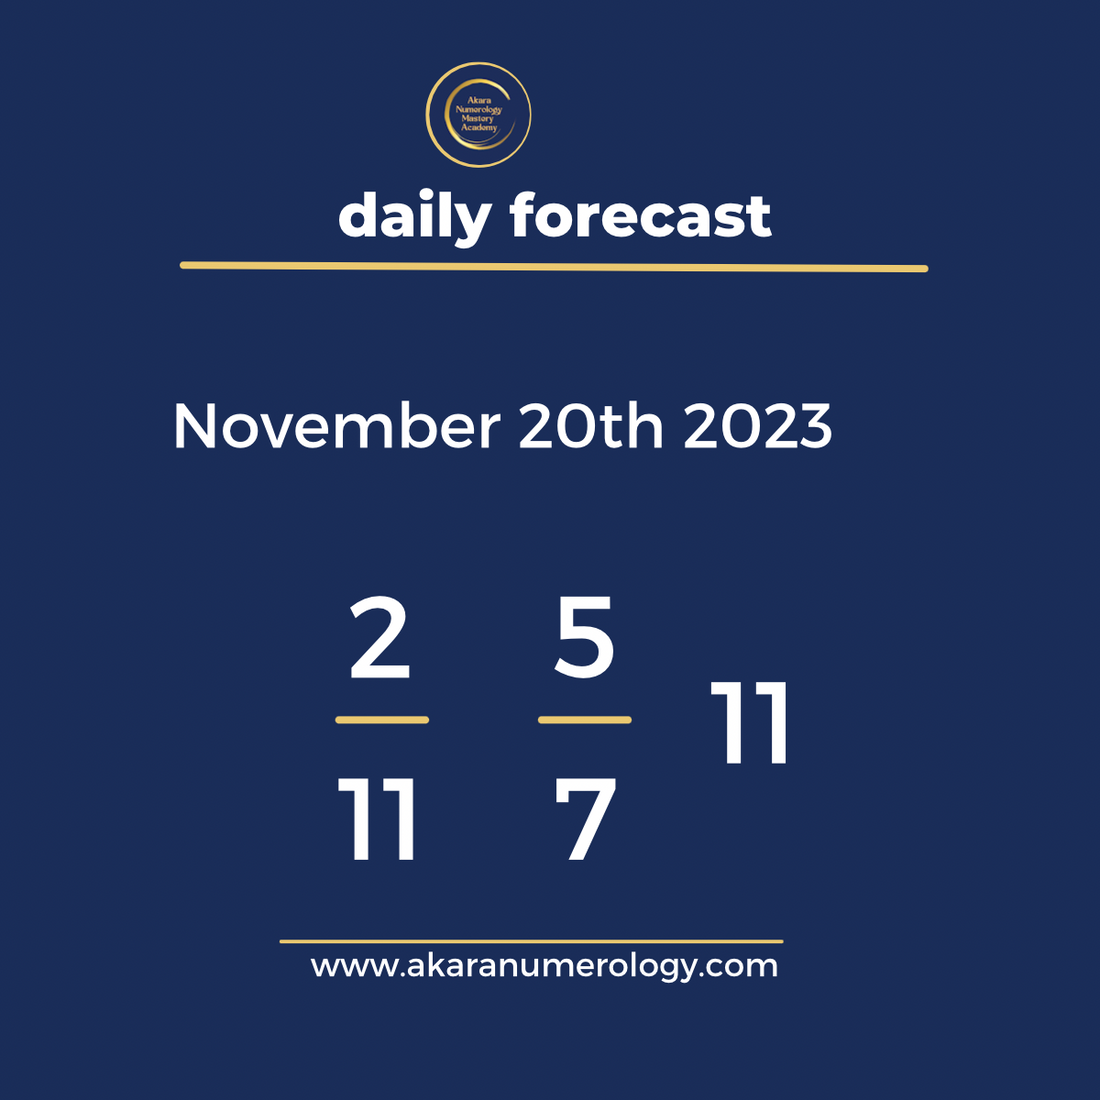 Daily forecast based upon the Akara Numerology by Sat Kirtan for November 20th 2023